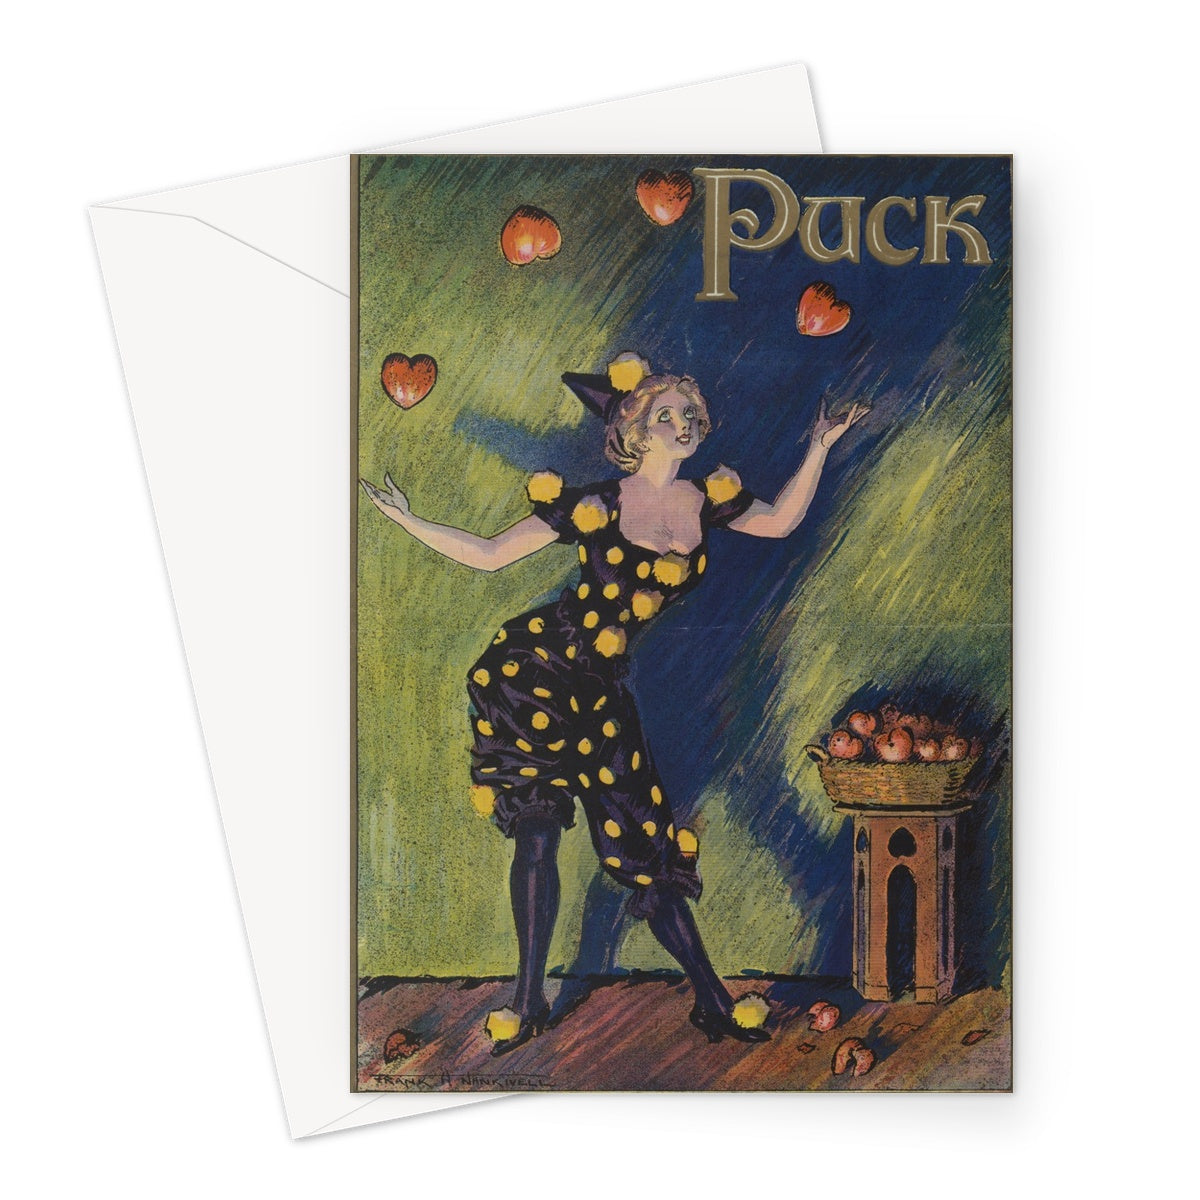 Saint Valentine for Puck magazine by Frank A. Nankivell, 1911.